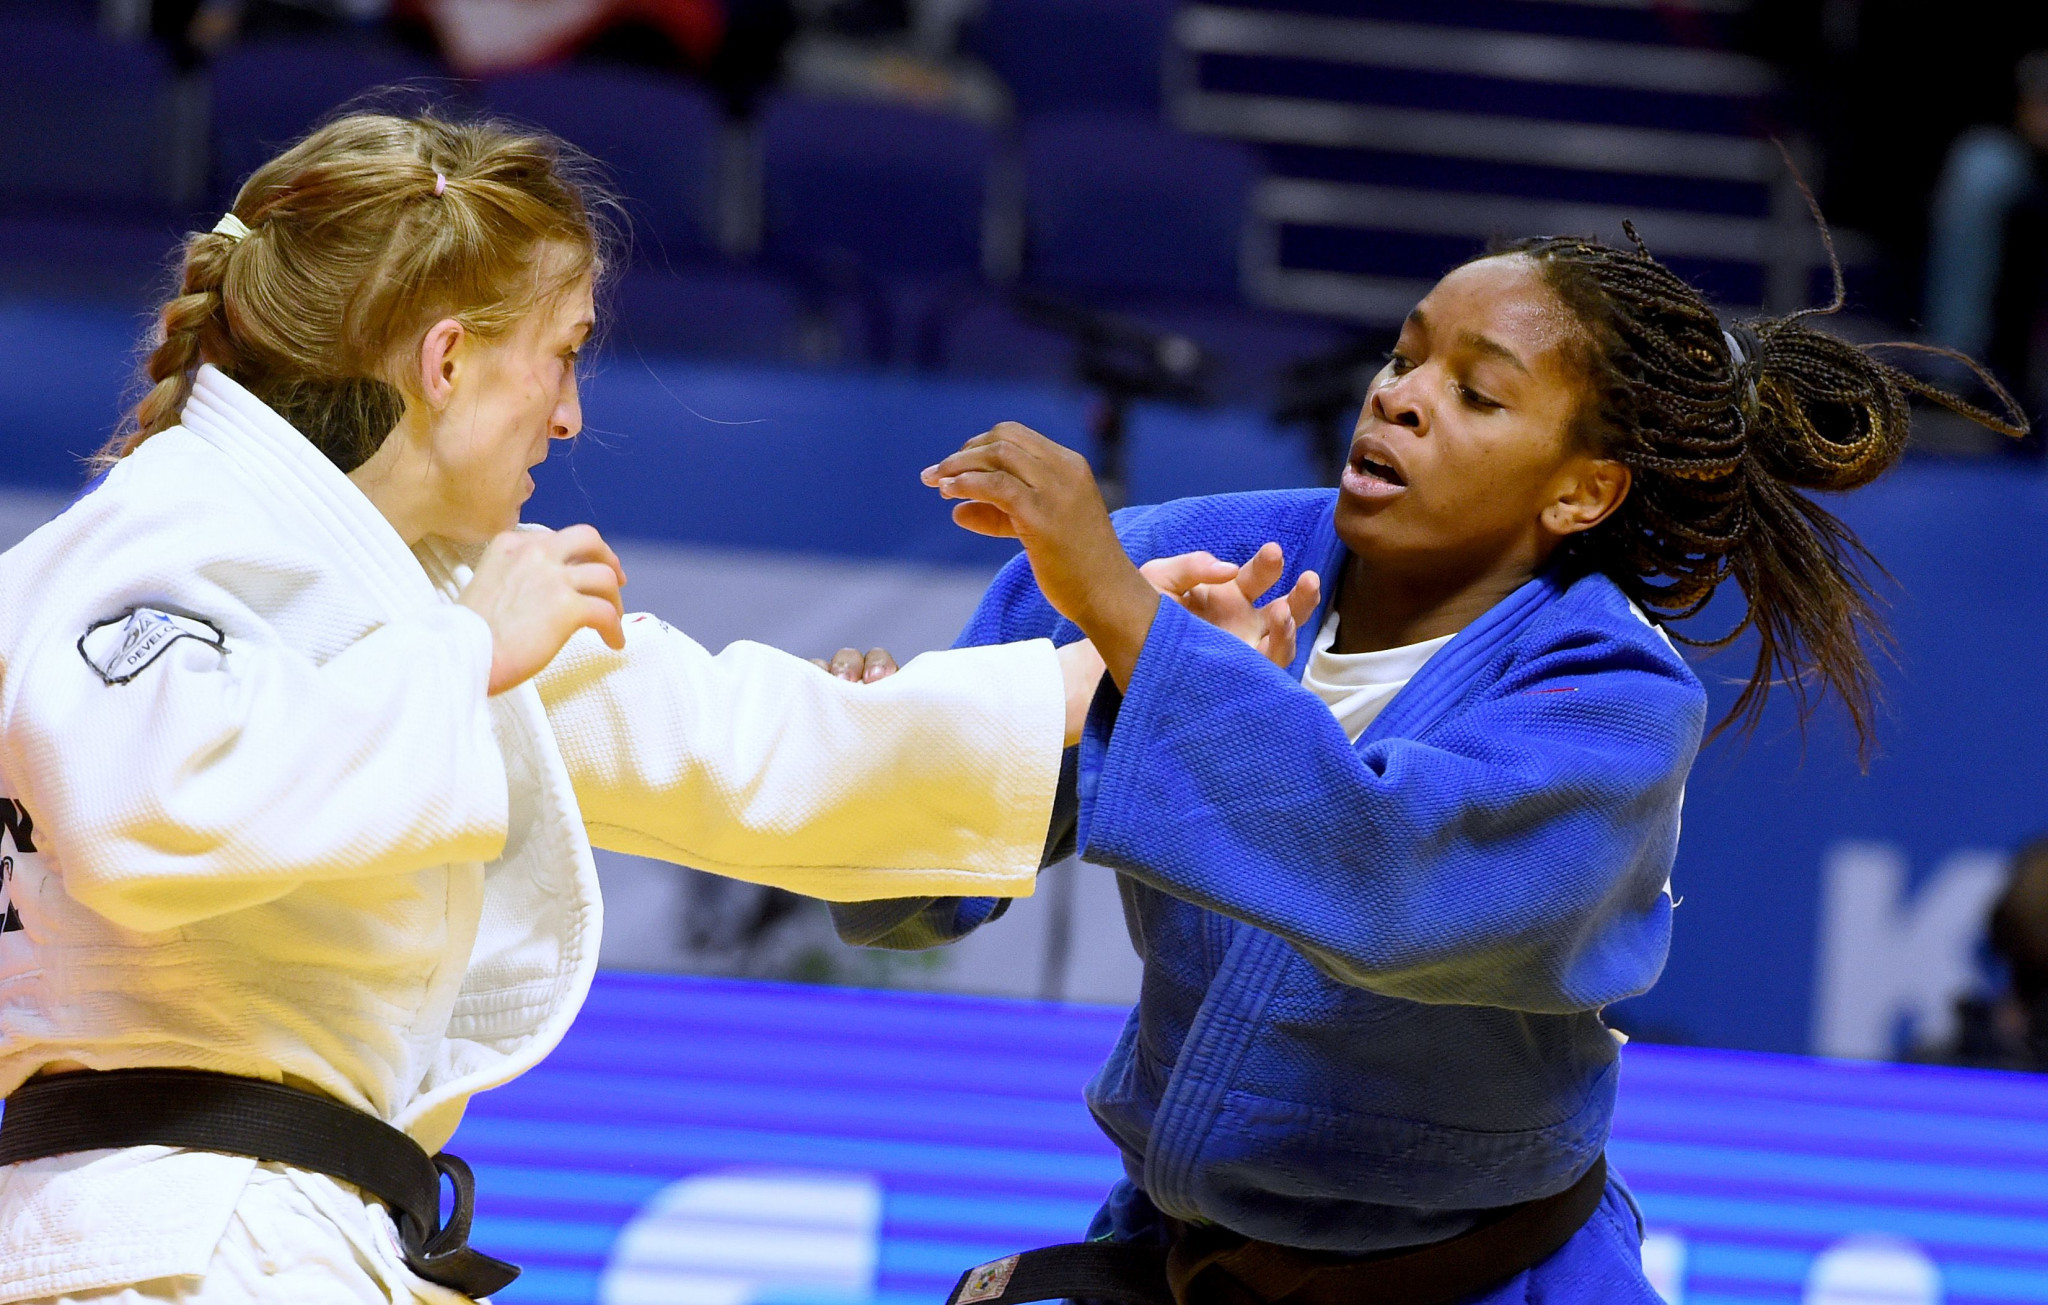 Judoka Edwige Gwend was among the athletes supporting the campaign ©Getty Images